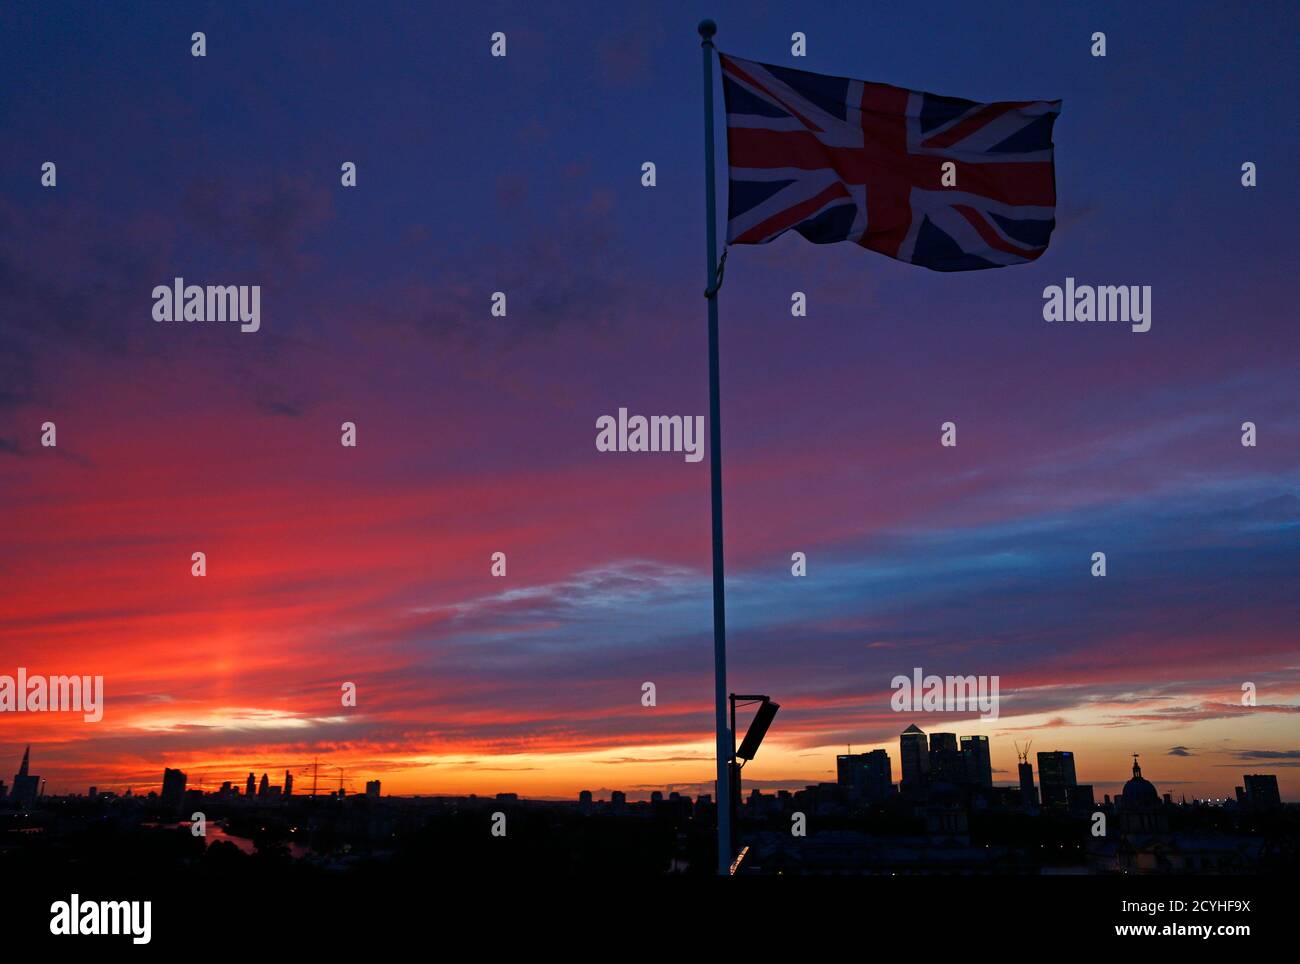 The Union flag is seen at Greenwich Park as the sun sets over the city of London July 30, 2012.     REUTERS/Eddie Keogh (BRITAIN - Tags: SPORT OLYMPICS CITYSPACE) Stock Photo